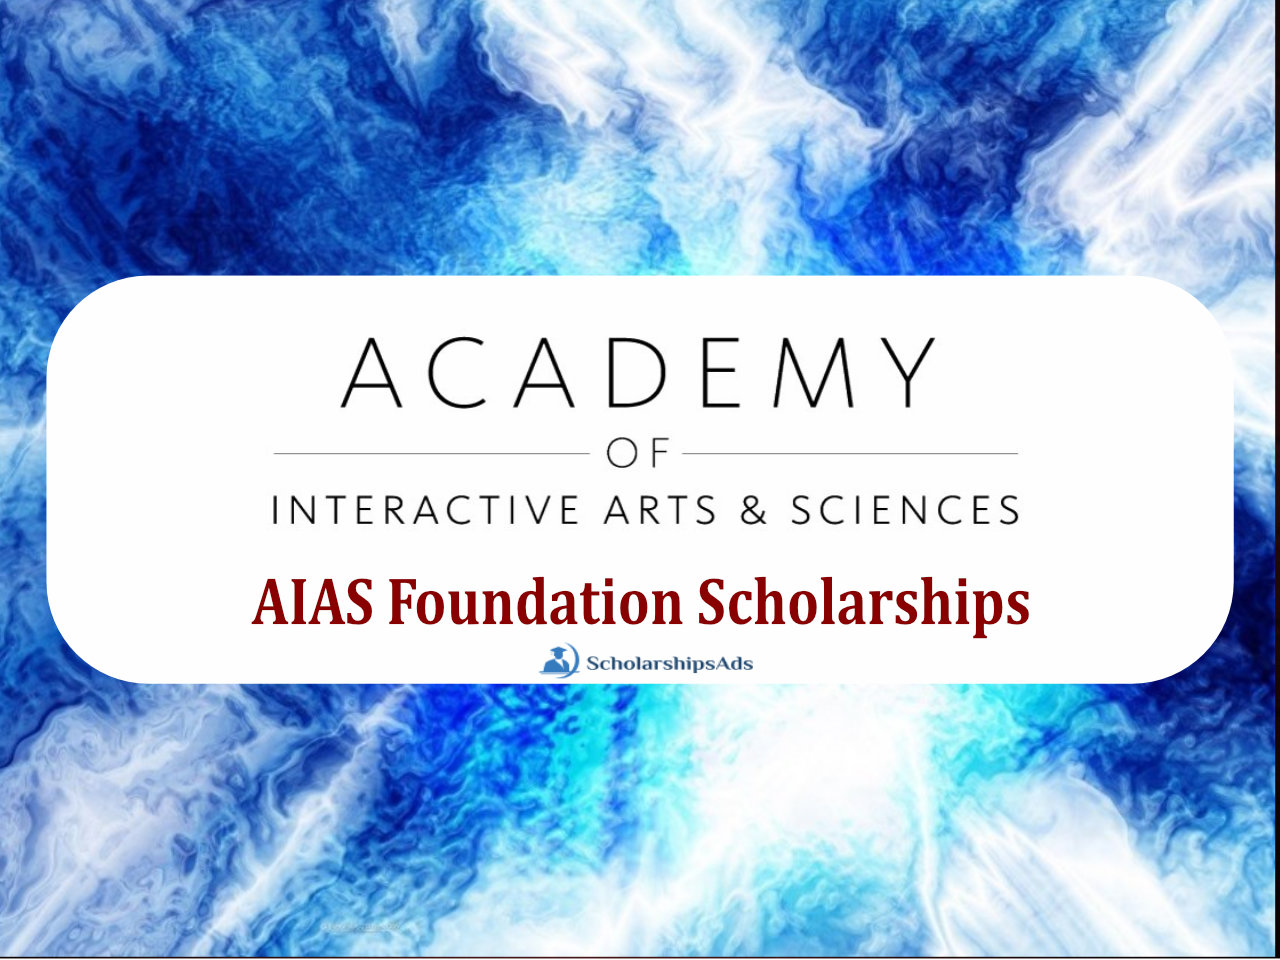 Academy of Interactive Arts and Sciences (AIAS) Foundation Scholarships USA, 2022/2023